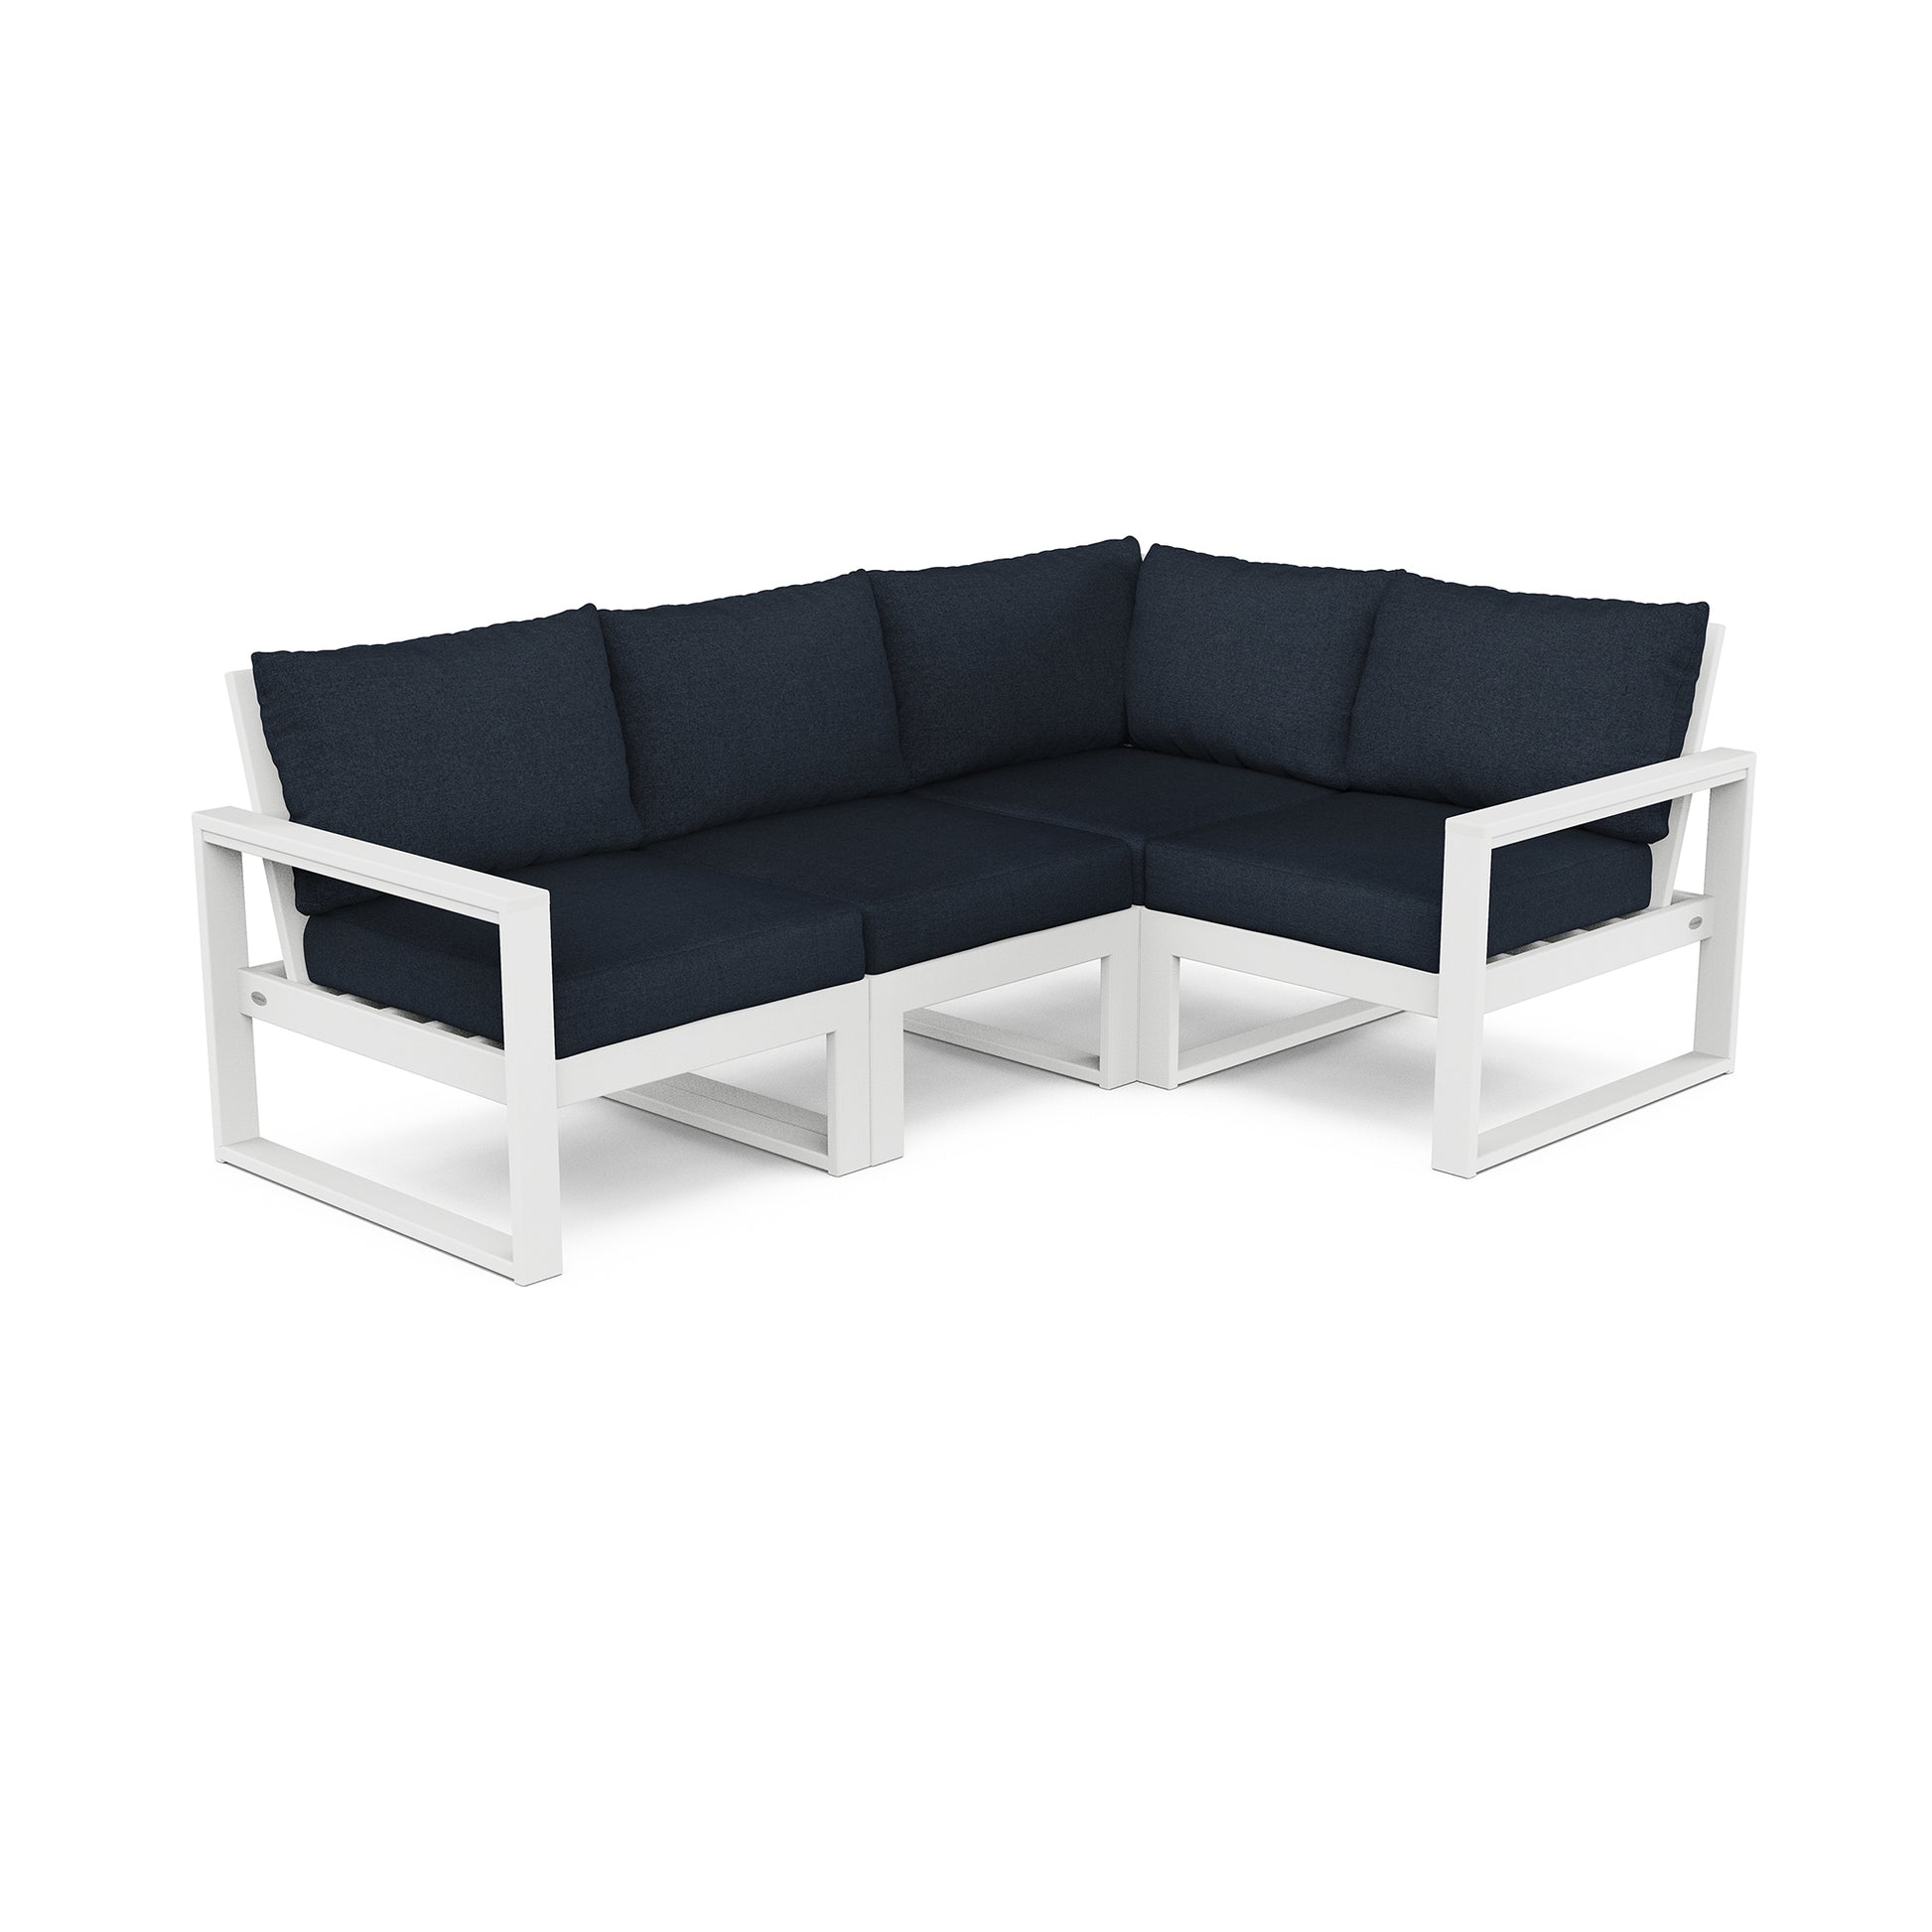 A modern white POLYWOOD EDGE 4-Piece Modular Deep Seating Set with deep blue cushions, isolated on a white background. The sofa has a sleek, white metal frame with clean lines and is part of the POLYWOOD® EDGE modular.